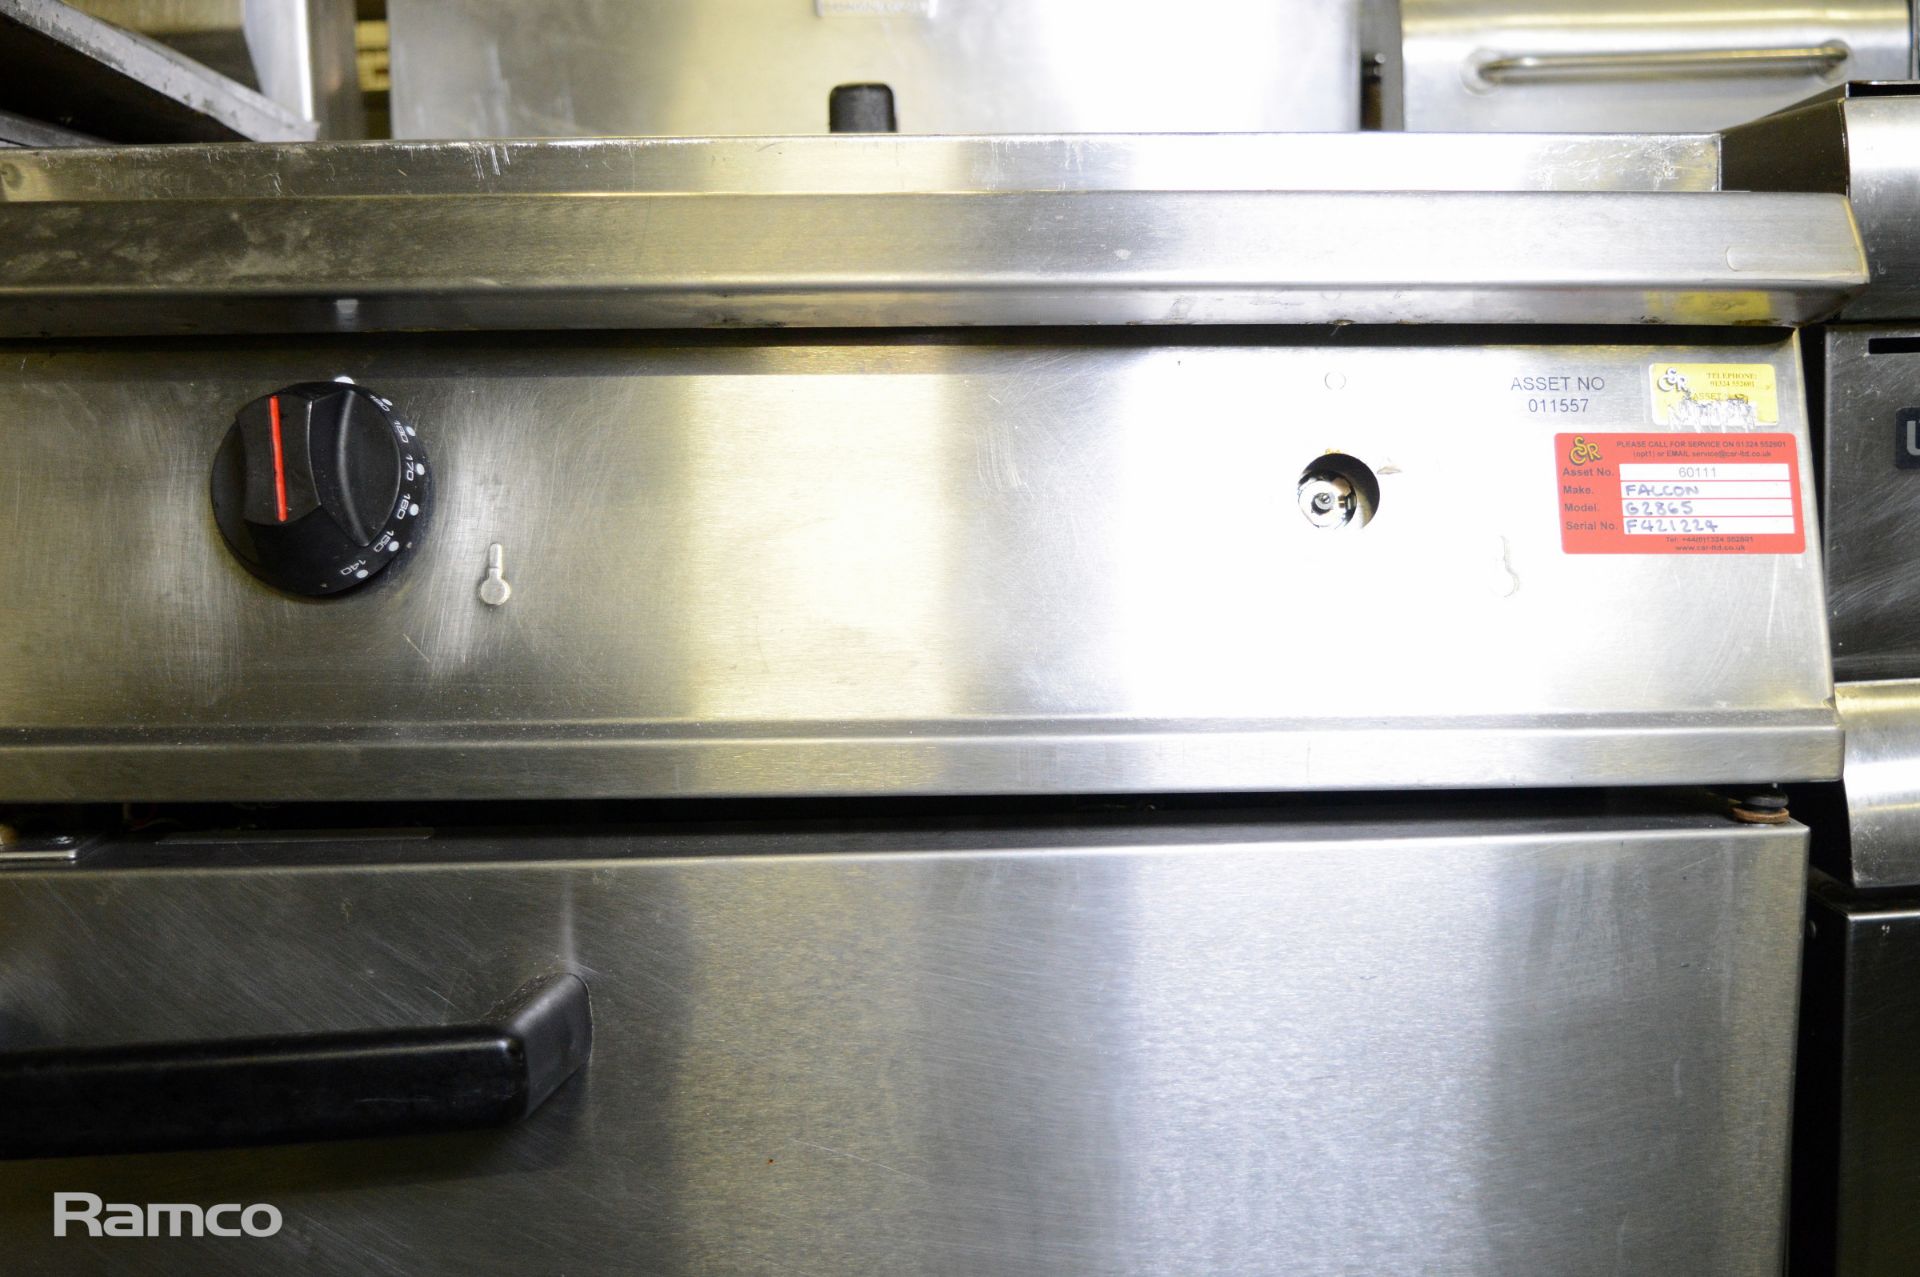 Falcon Dominator G2865 free standing twin basket gas fryer - missing 1 control knob - Image 2 of 6